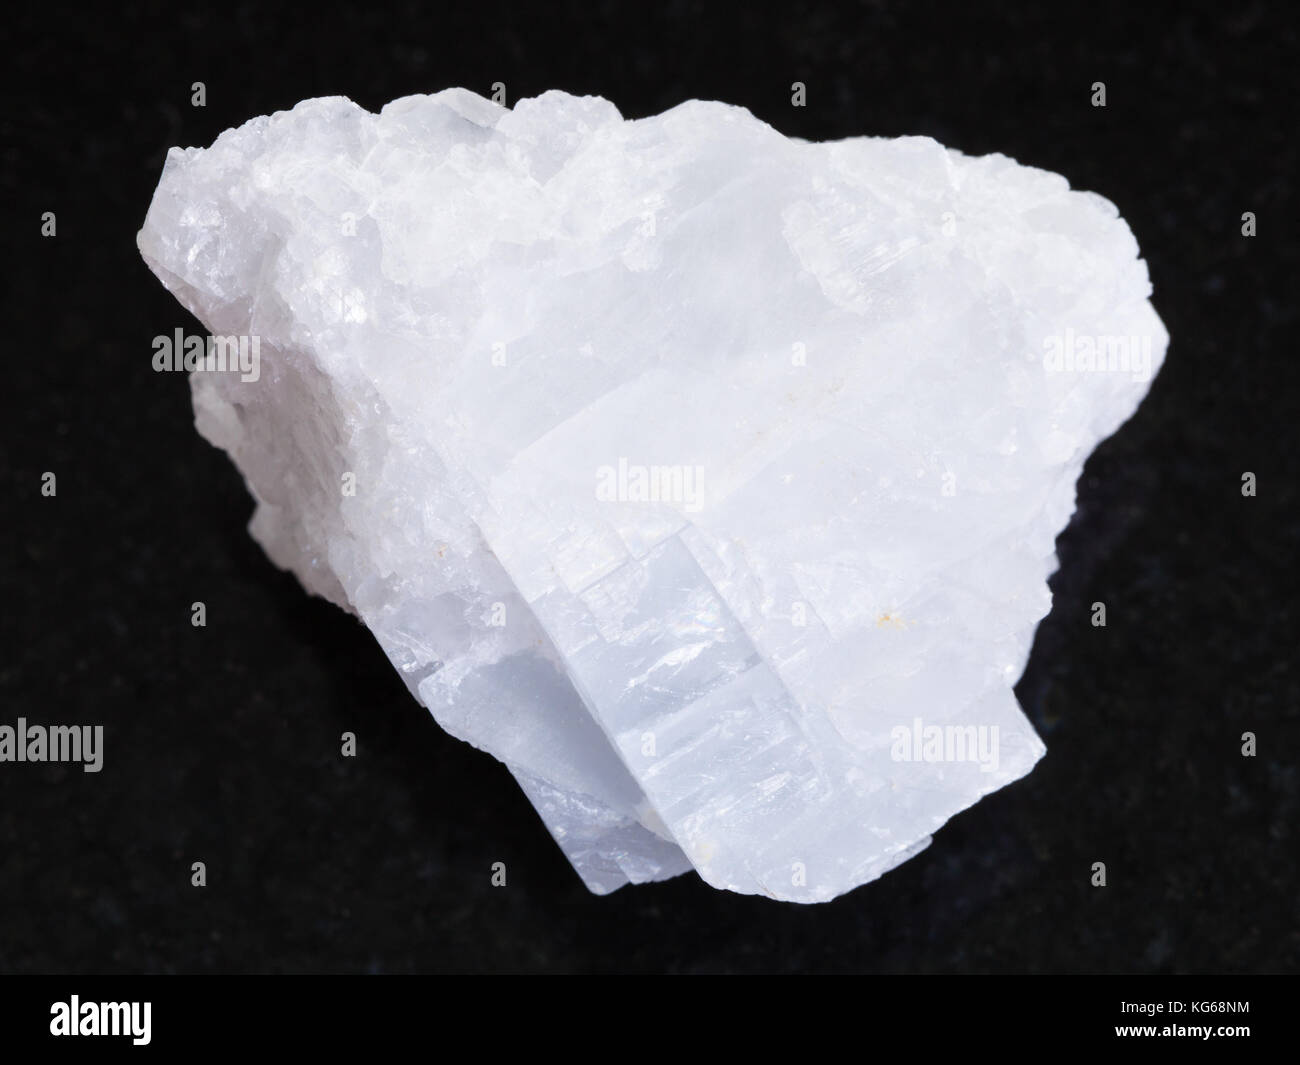 Set of Various Polished White Rocks with Names Stock Photo - Image of  magnesite, howlite: 237160246